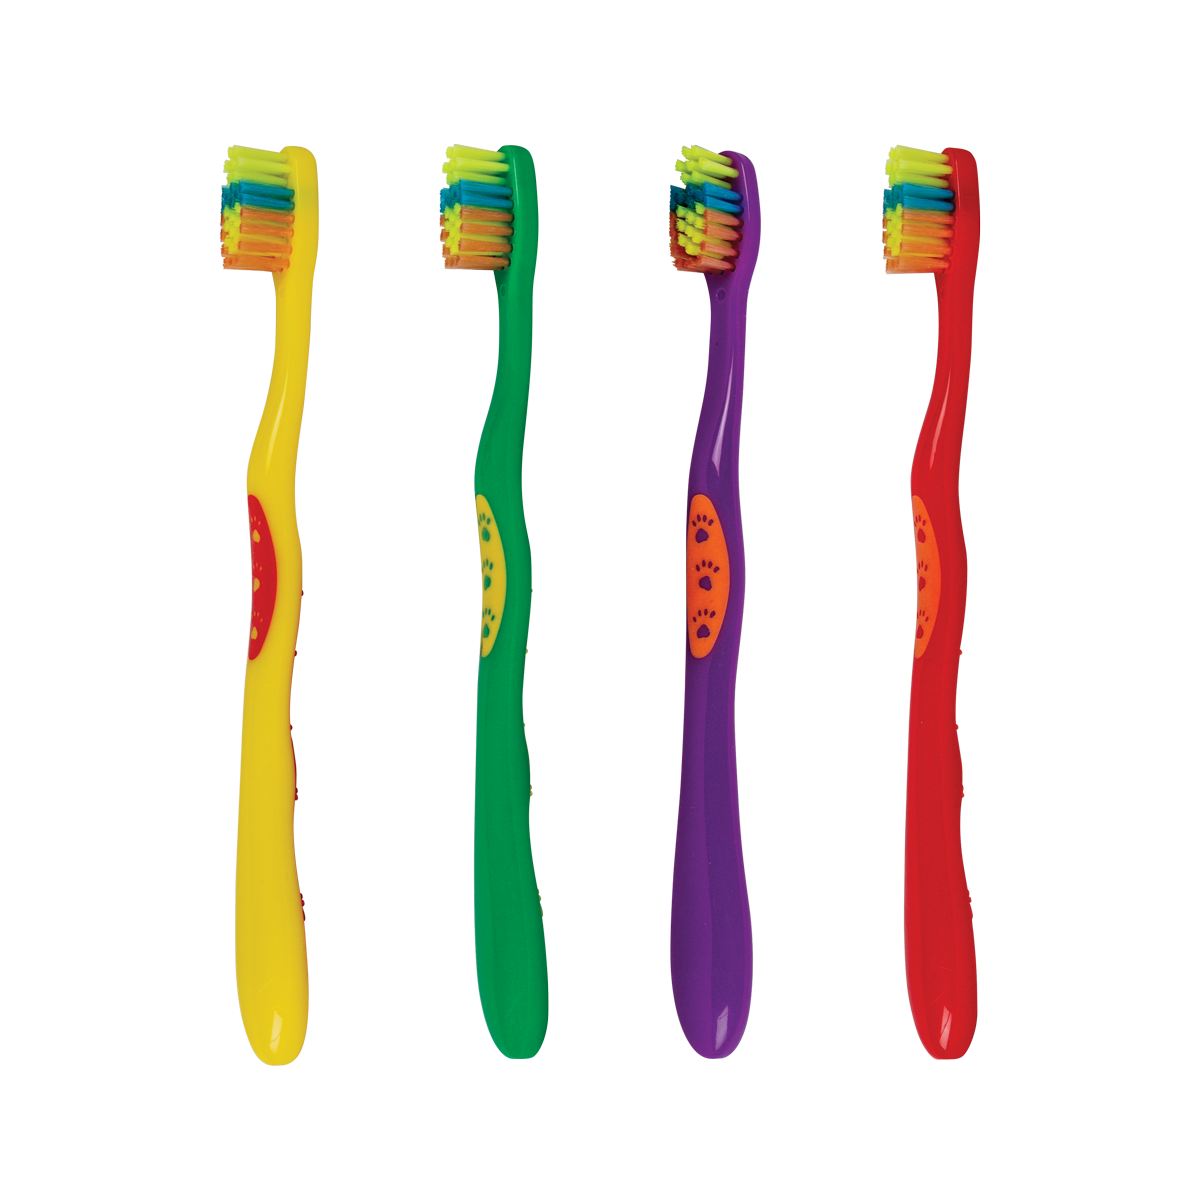 SmartSmile Pedo Toothbrushes - All Colors